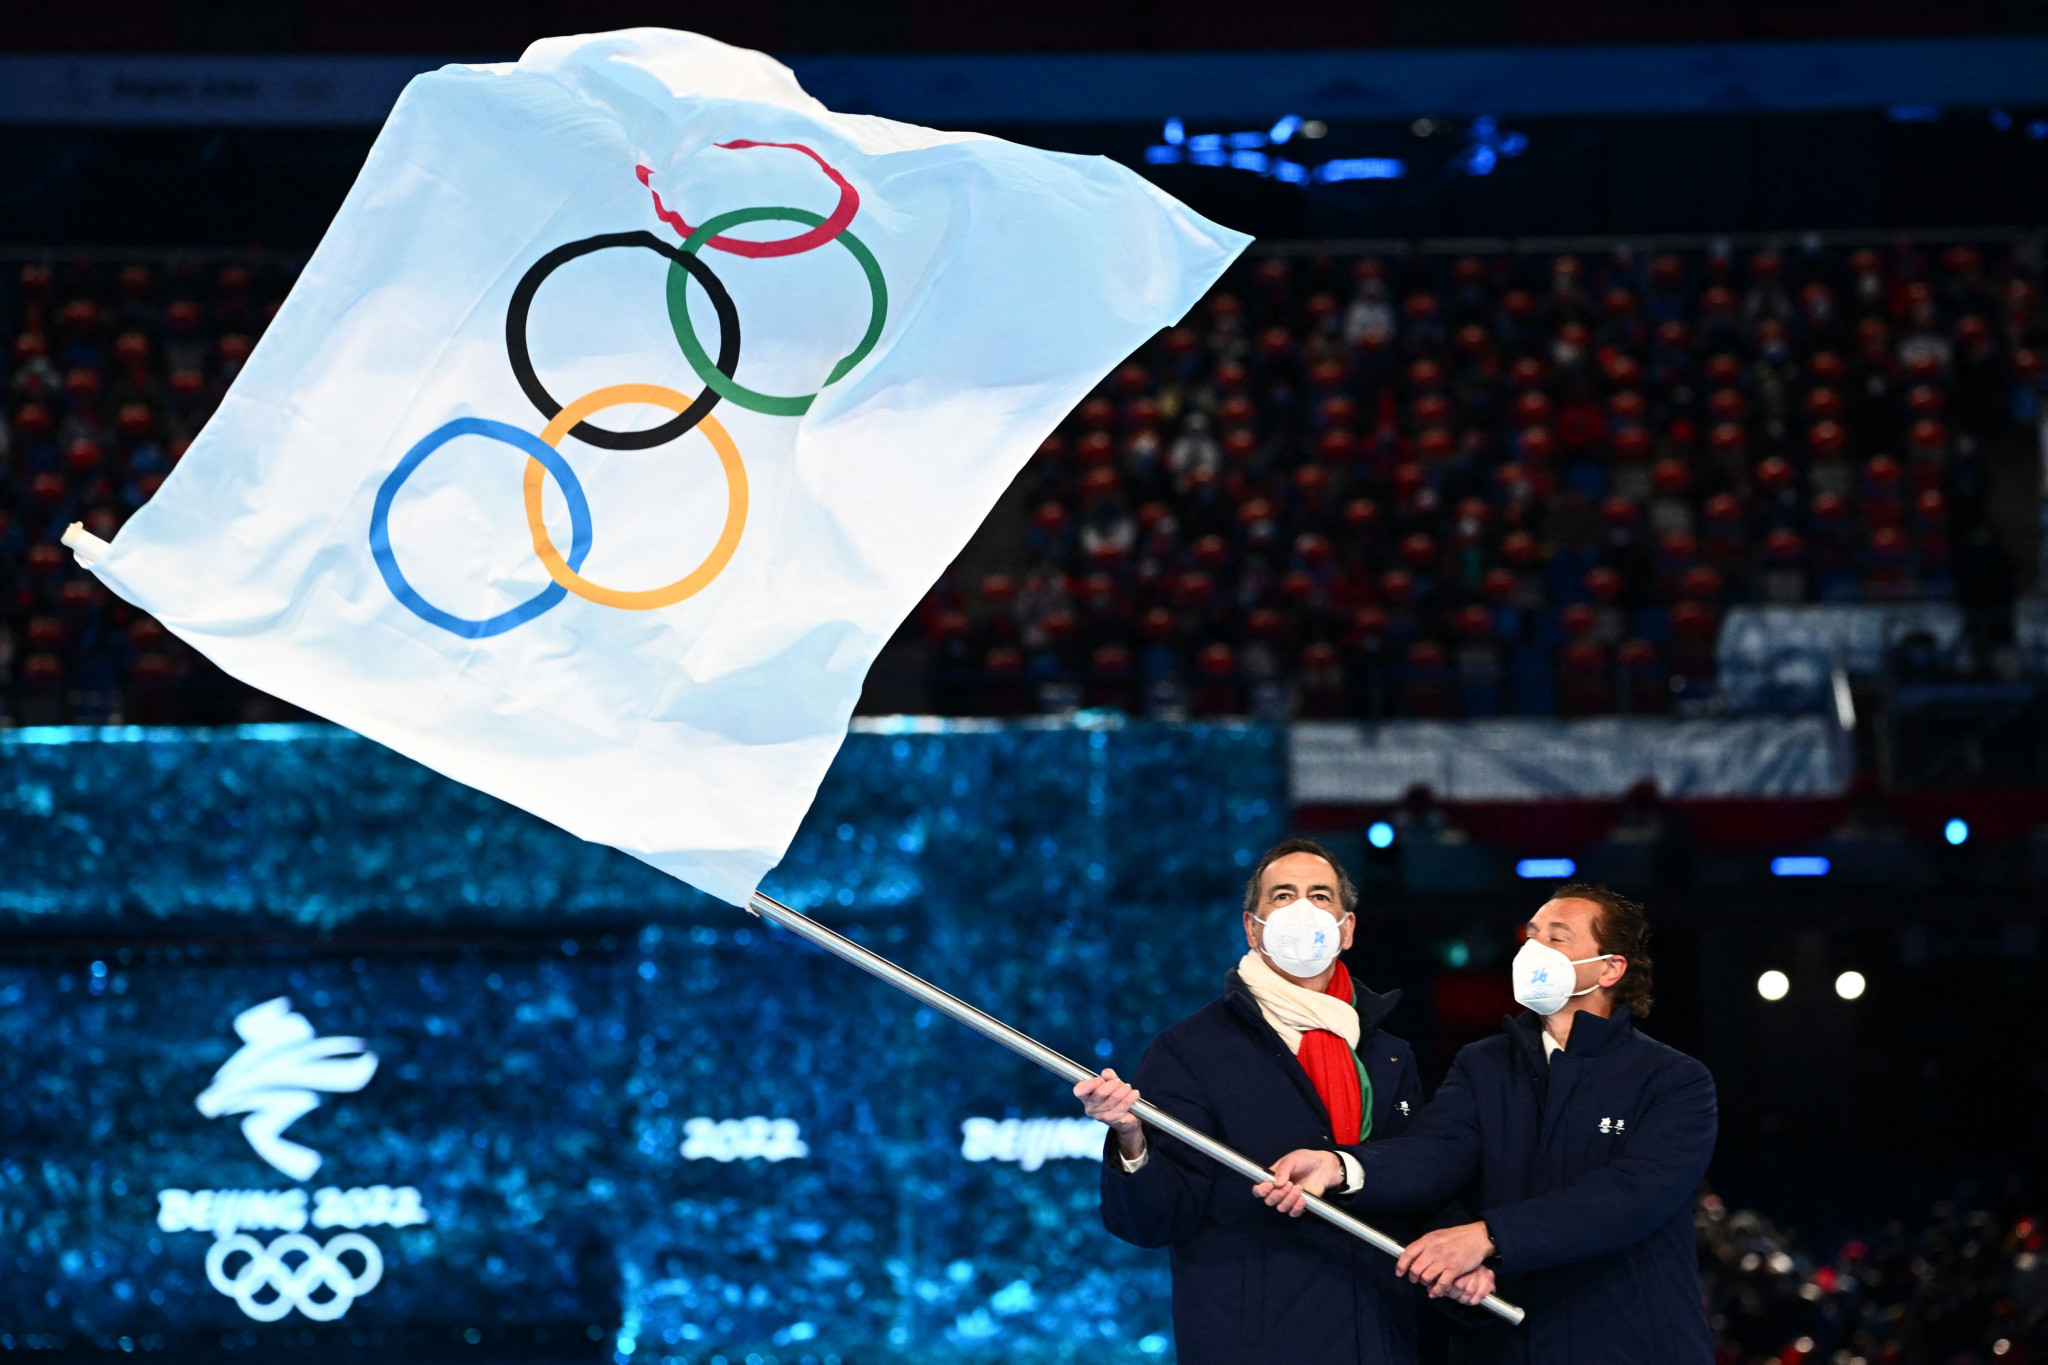 Mayors Giuseppe Sala and Gianpietro Ghedina wave the Olympic Handover Flag at the Beijing National Stadium ©Getty Images